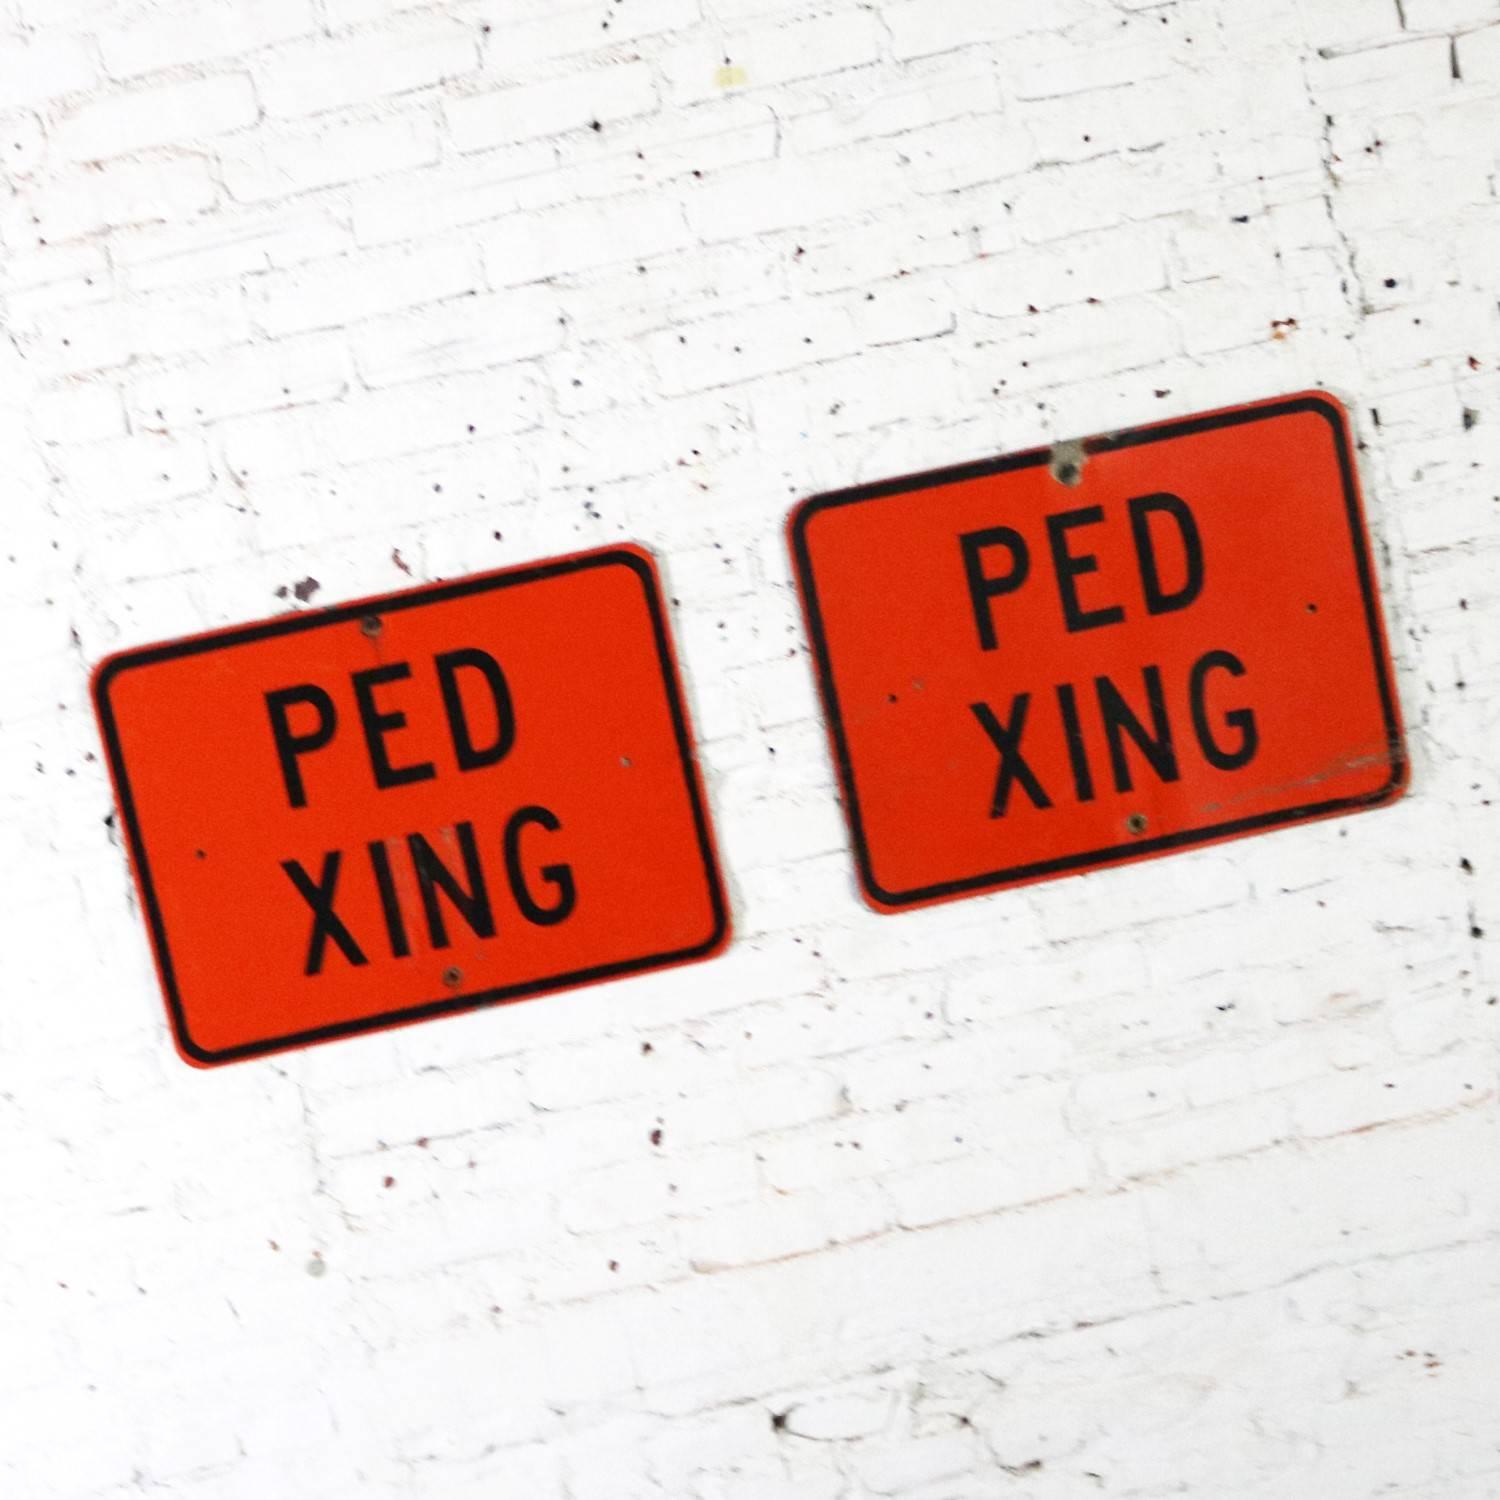 ped xing sign